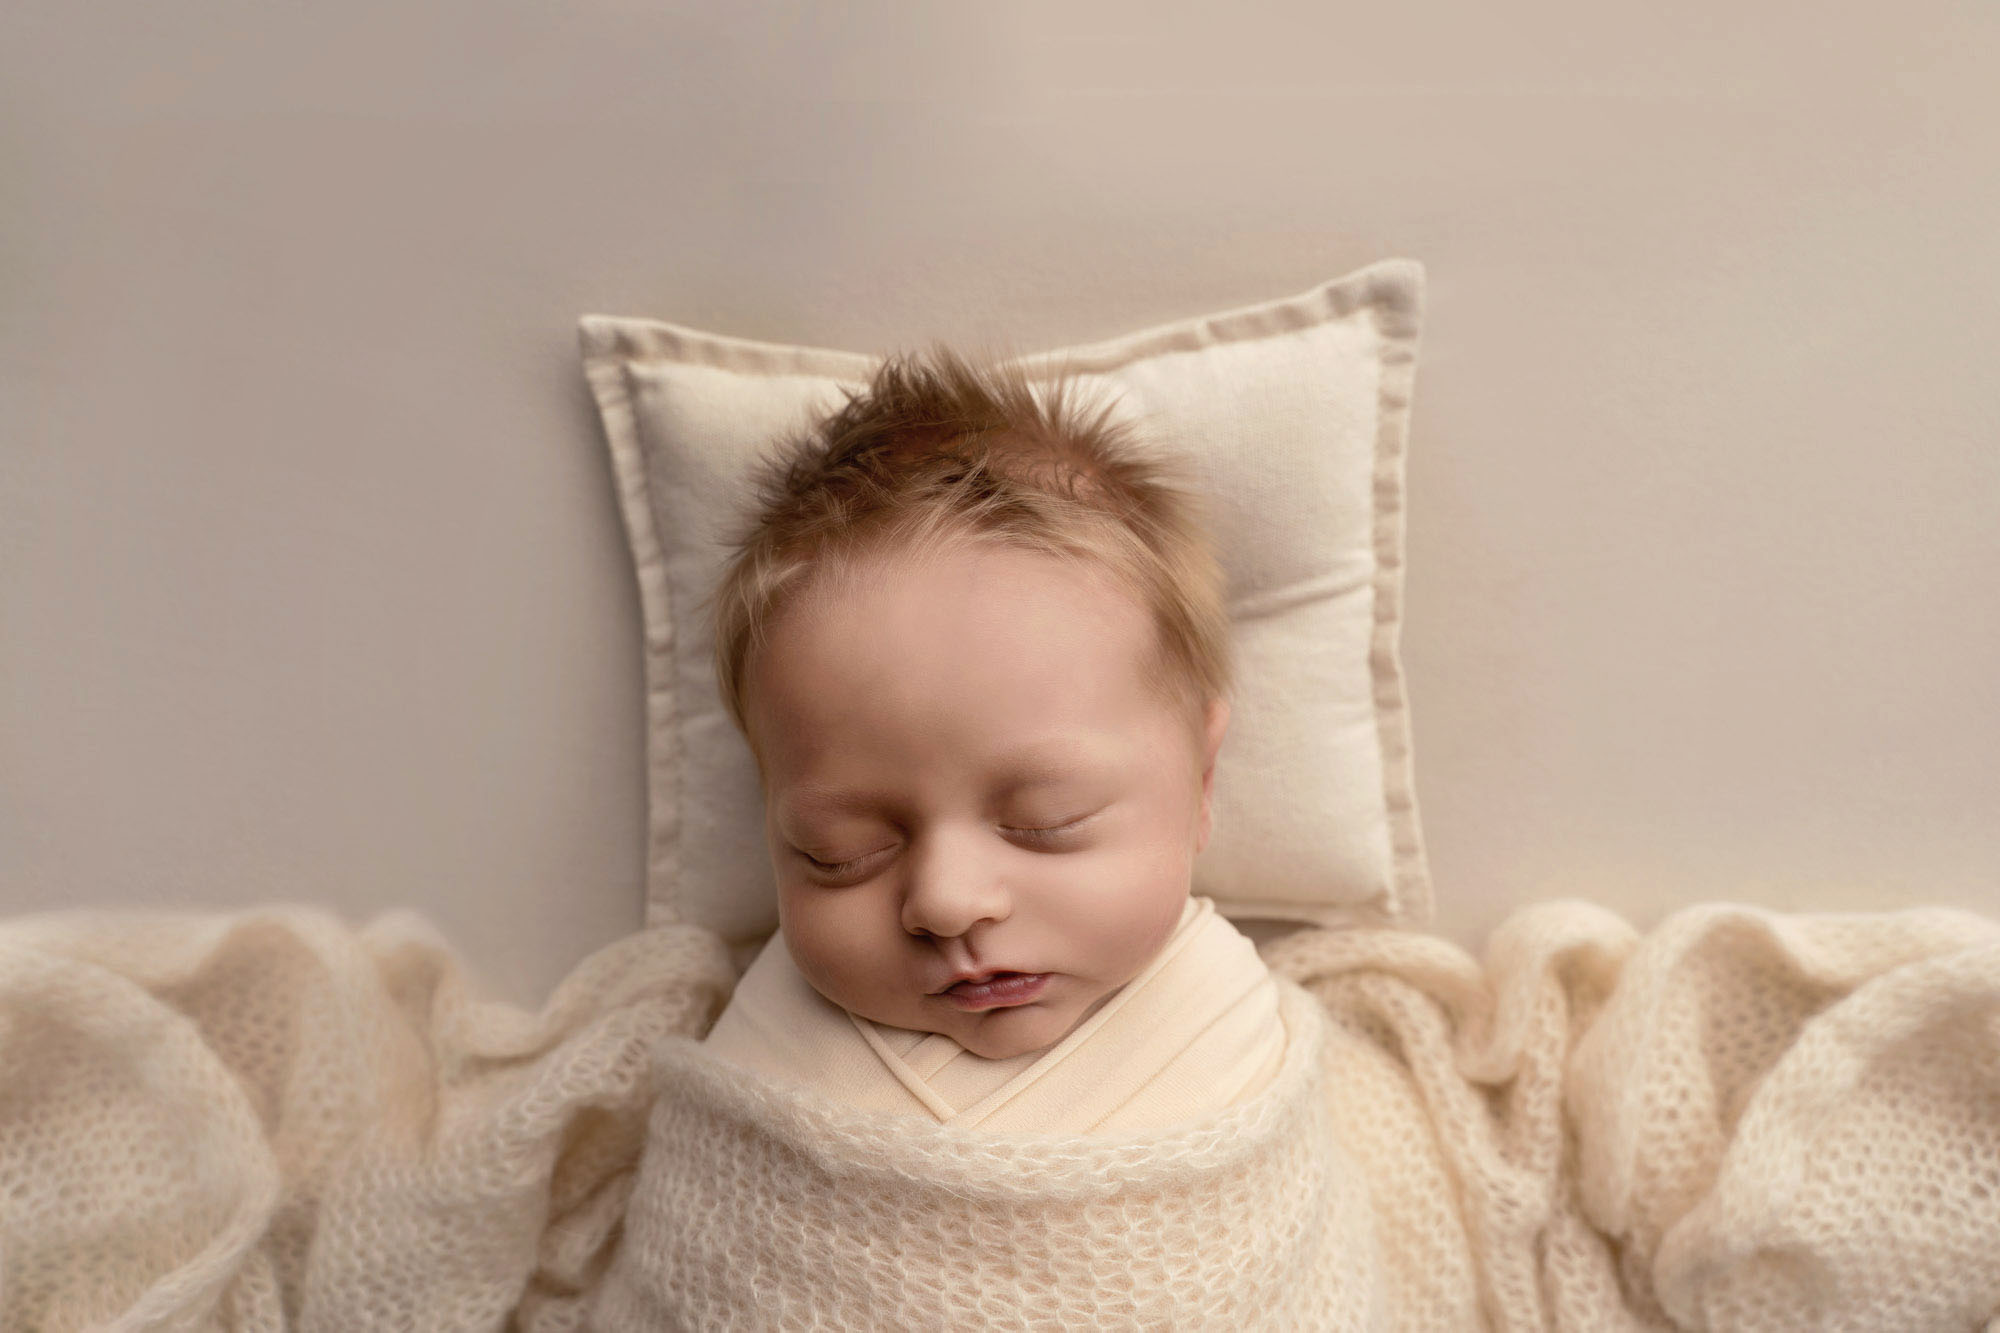 Newborn photographer Edinburgh - colour photograph of newborn boy wrapped in a swaddle with a small pillow underneath his head taken by Edinburgh newborn photographer Beautiful Bairns Photography